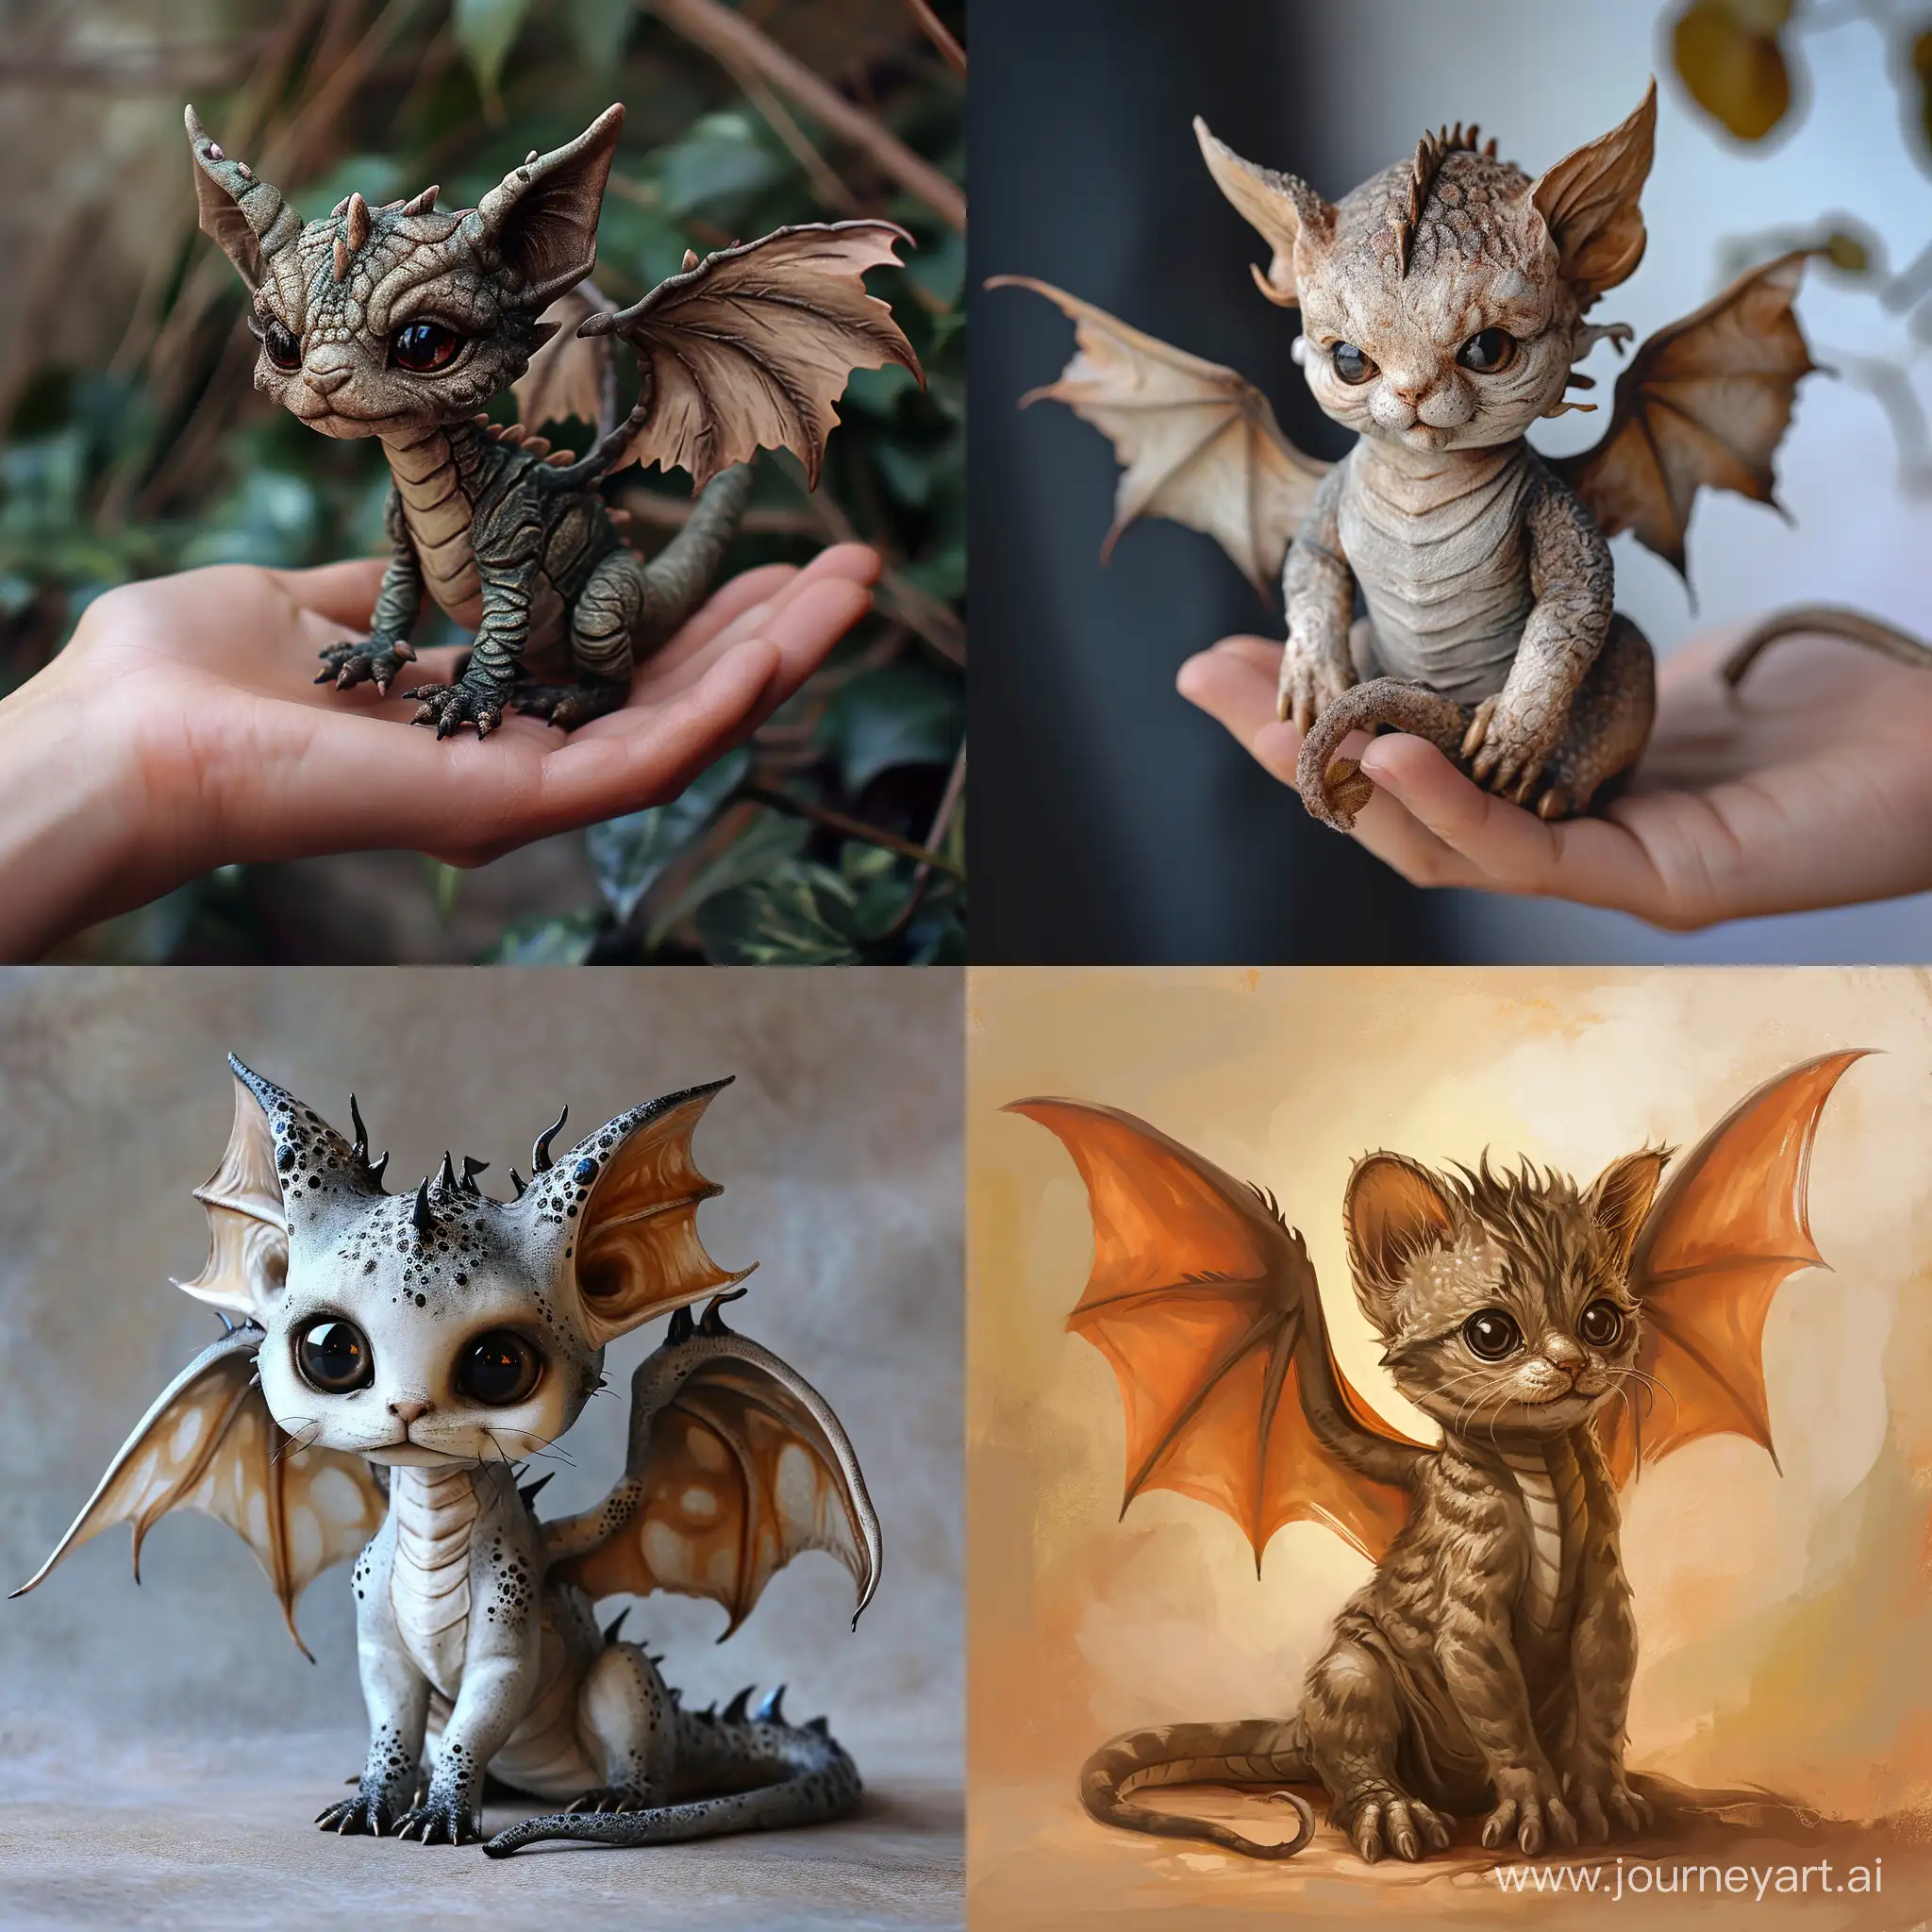 Adorable Winged Dragon with KittenLike Face | Midjourney Prompt